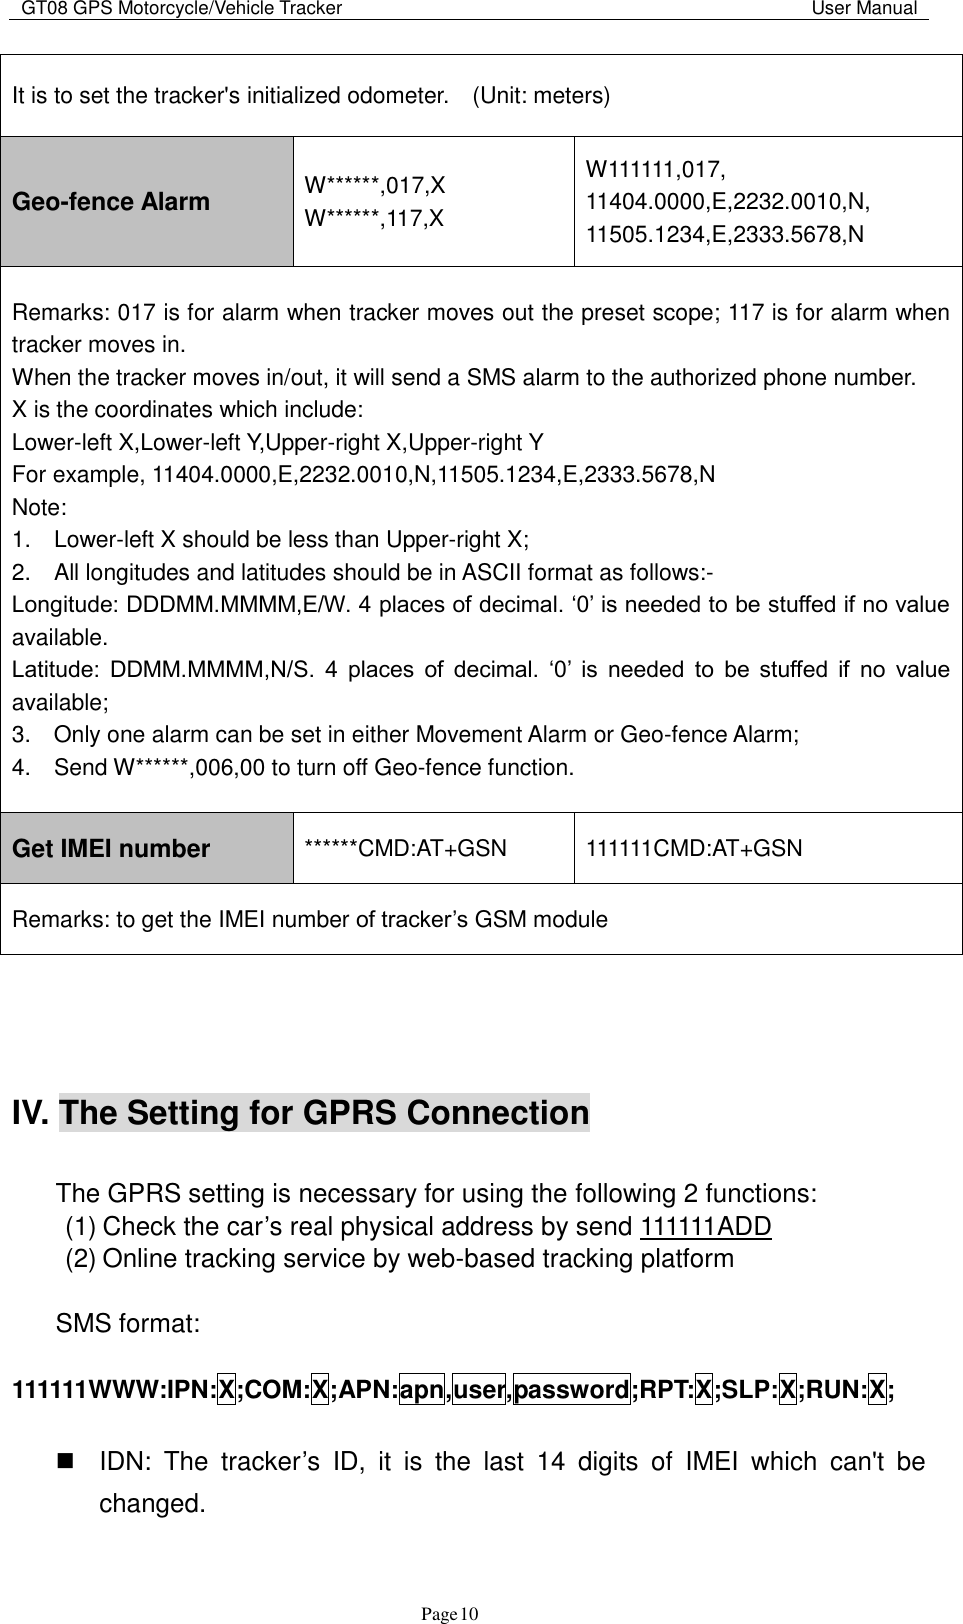 GT08 GPS Motorcycle/Vehicle Tracker                                                                                           User Manual                                     Page   10 It is to set the tracker&apos;s initialized odometer.    (Unit: meters) Geo-fence Alarm W******,017,X   W******,117,X W111111,017, 11404.0000,E,2232.0010,N, 11505.1234,E,2333.5678,N Remarks: 017 is for alarm when tracker moves out the preset scope; 117 is for alarm when tracker moves in.   When the tracker moves in/out, it will send a SMS alarm to the authorized phone number.   X is the coordinates which include:   Lower-left X,Lower-left Y,Upper-right X,Upper-right Y   For example, 11404.0000,E,2232.0010,N,11505.1234,E,2333.5678,N   Note:   1.    Lower-left X should be less than Upper-right X;   2.    All longitudes and latitudes should be in ASCII format as follows:-   Longitude: DDDMM.MMMM,E/W. 4 places of decimal. „0‟ is needed to be stuffed if no value available.   Latitude:  DDMM.MMMM,N/S.  4  places  of  decimal.  „0‟  is  needed  to  be  stuffed  if  no  value available;   3.    Only one alarm can be set in either Movement Alarm or Geo-fence Alarm;   4.    Send W******,006,00 to turn off Geo-fence function. Get IMEI number ******CMD:AT+GSN 111111CMD:AT+GSN Remarks: to get the IMEI number of tracker‟s GSM module    IV. The Setting for GPRS Connection    The GPRS setting is necessary for using the following 2 functions: (1) Check the car‟s real physical address by send 111111ADD (2) Online tracking service by web-based tracking platform    SMS format:    111111WWW:IPN:X;COM:X;APN:apn,user,password;RPT:X;SLP:X;RUN:X;    IDN:  The  tracker‟s  ID,  it  is  the  last  14  digits  of  IMEI  which  can&apos;t  be changed. 